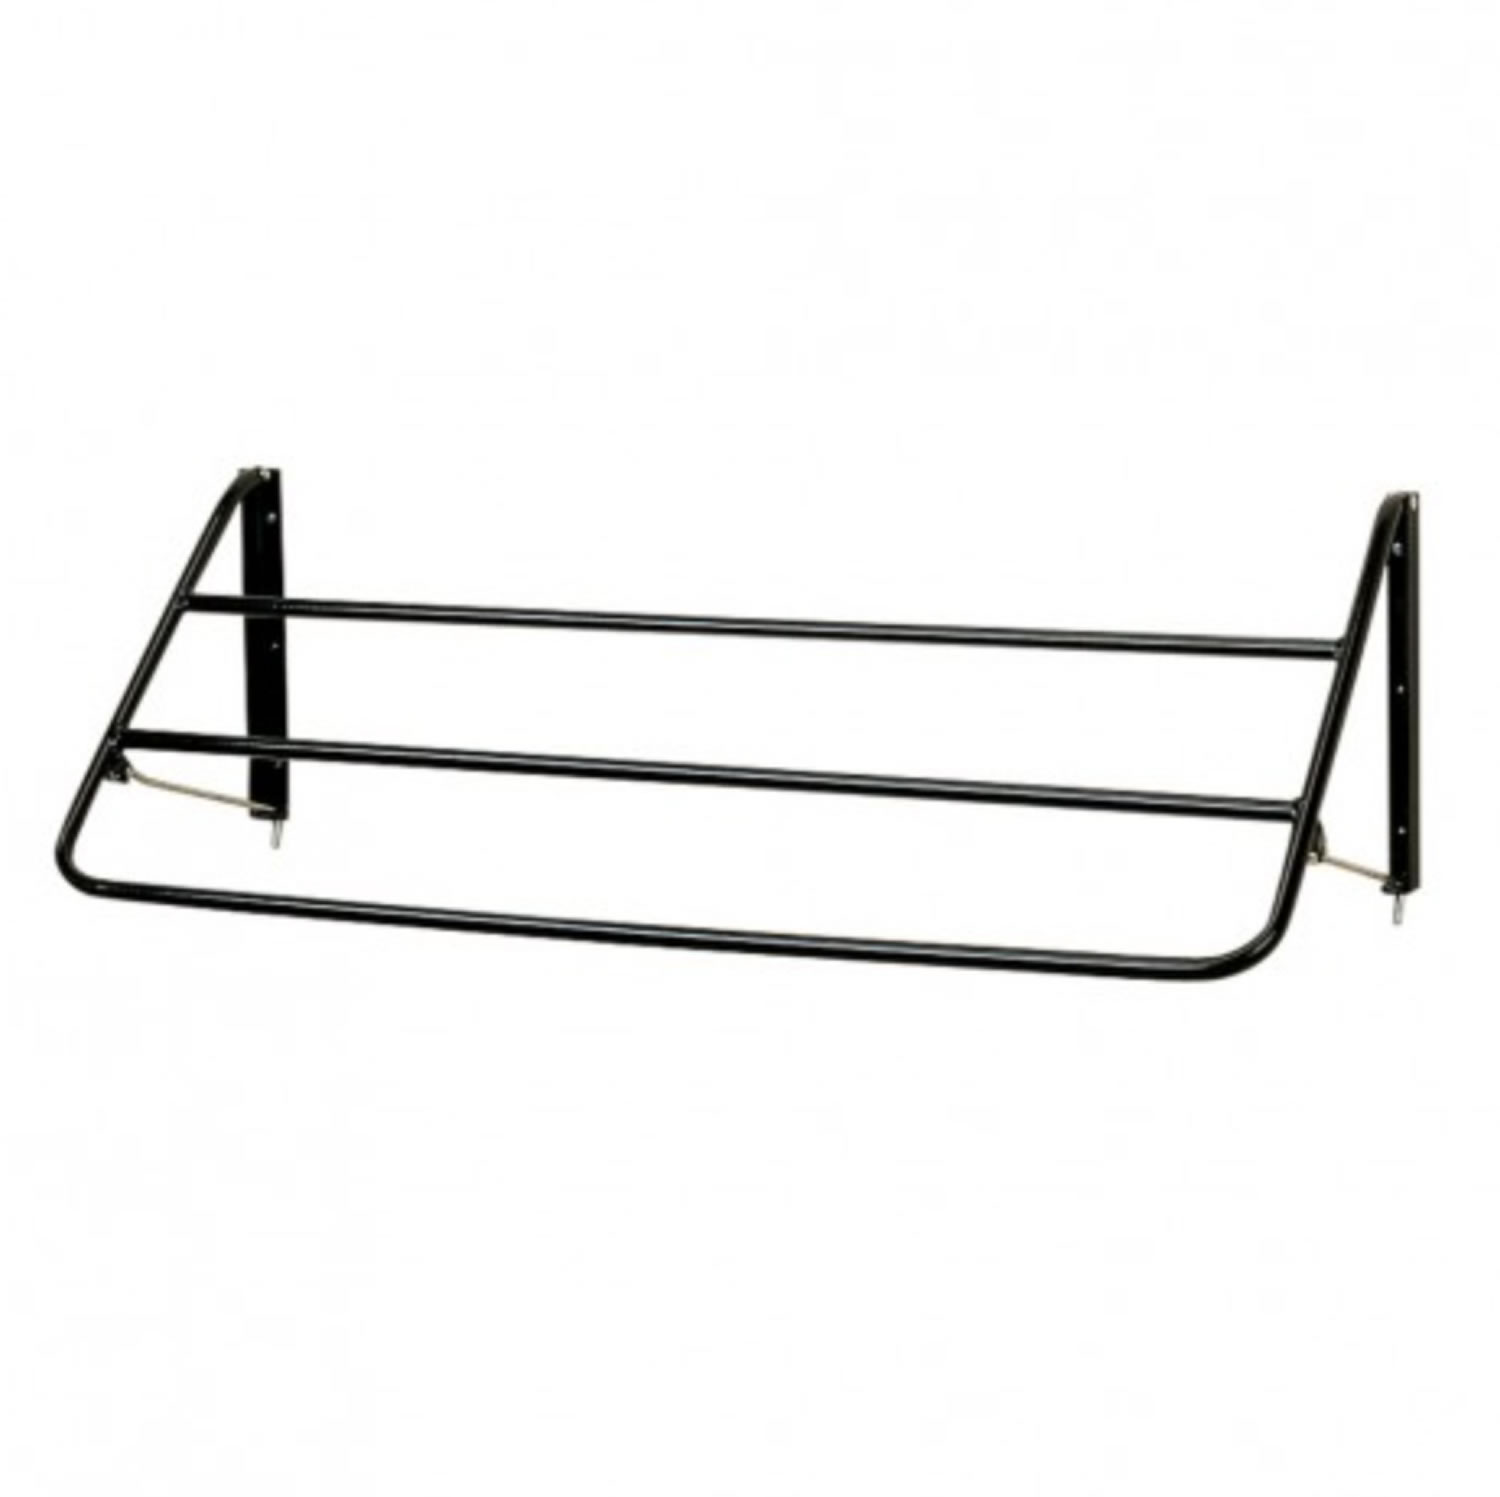 STUBBS RUG RACK COLLAPSIBLE S89 SPARE BRACKETS